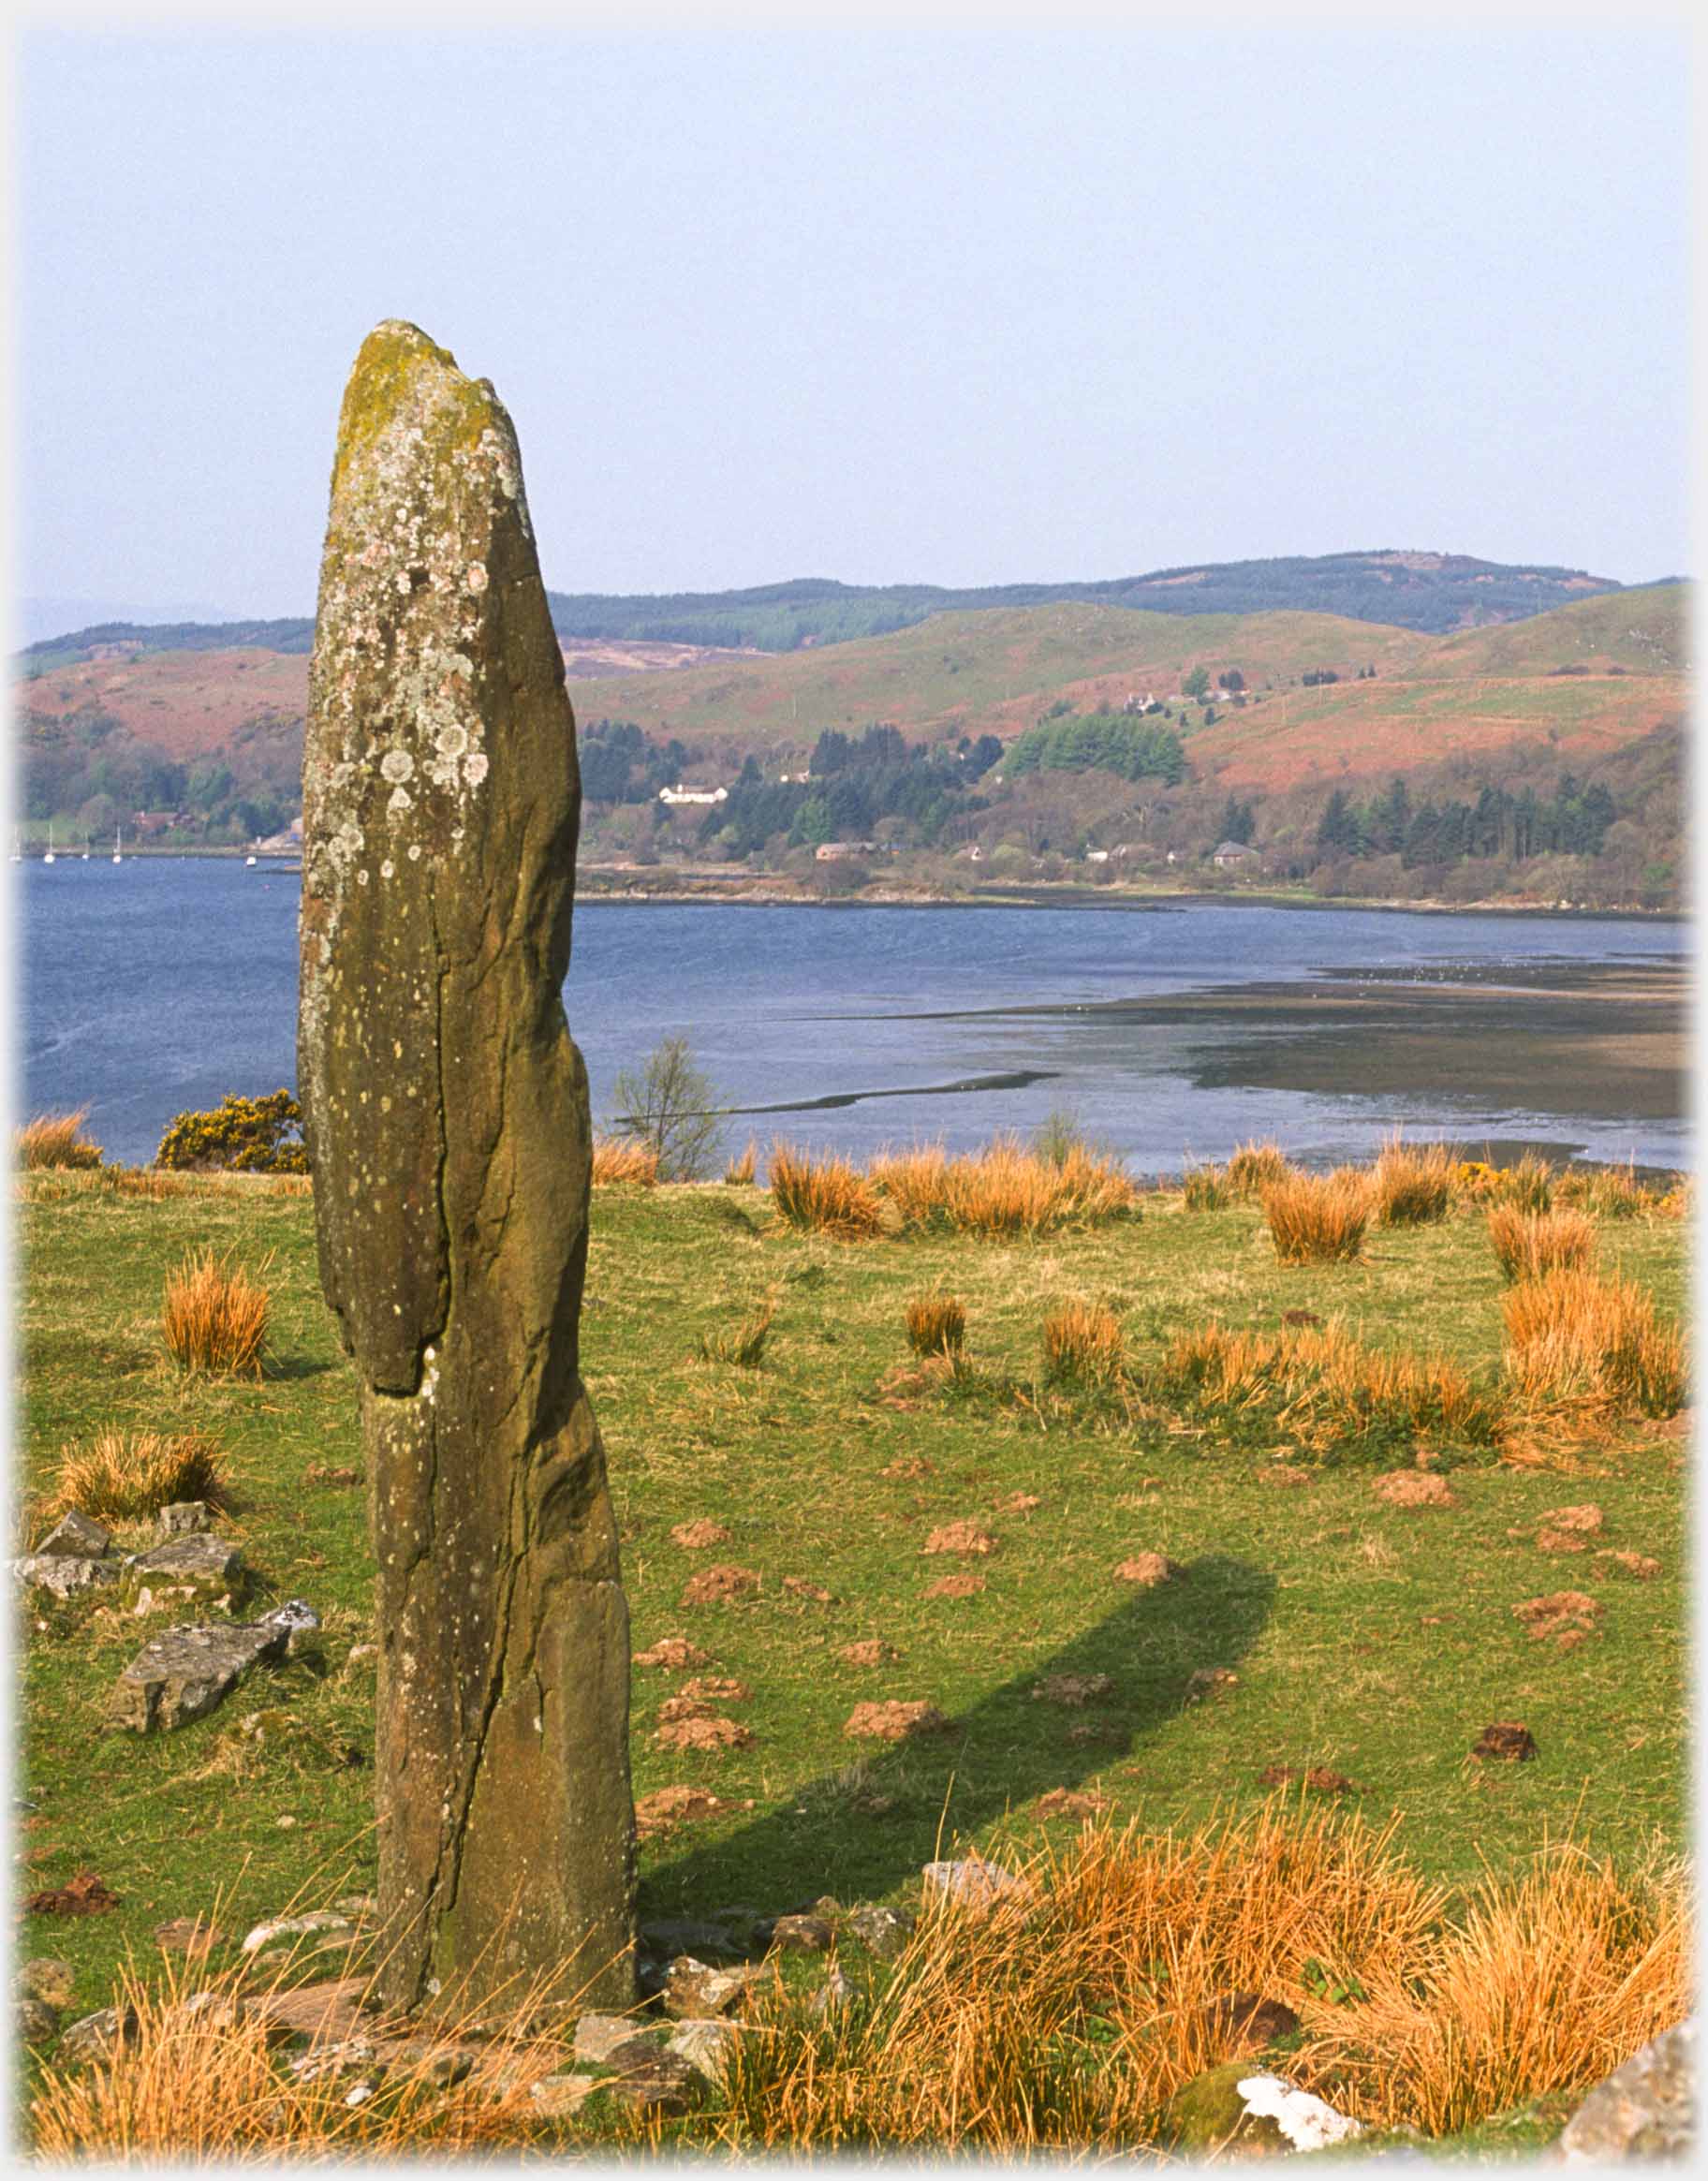 Monolith with  bay and hiills beyond.